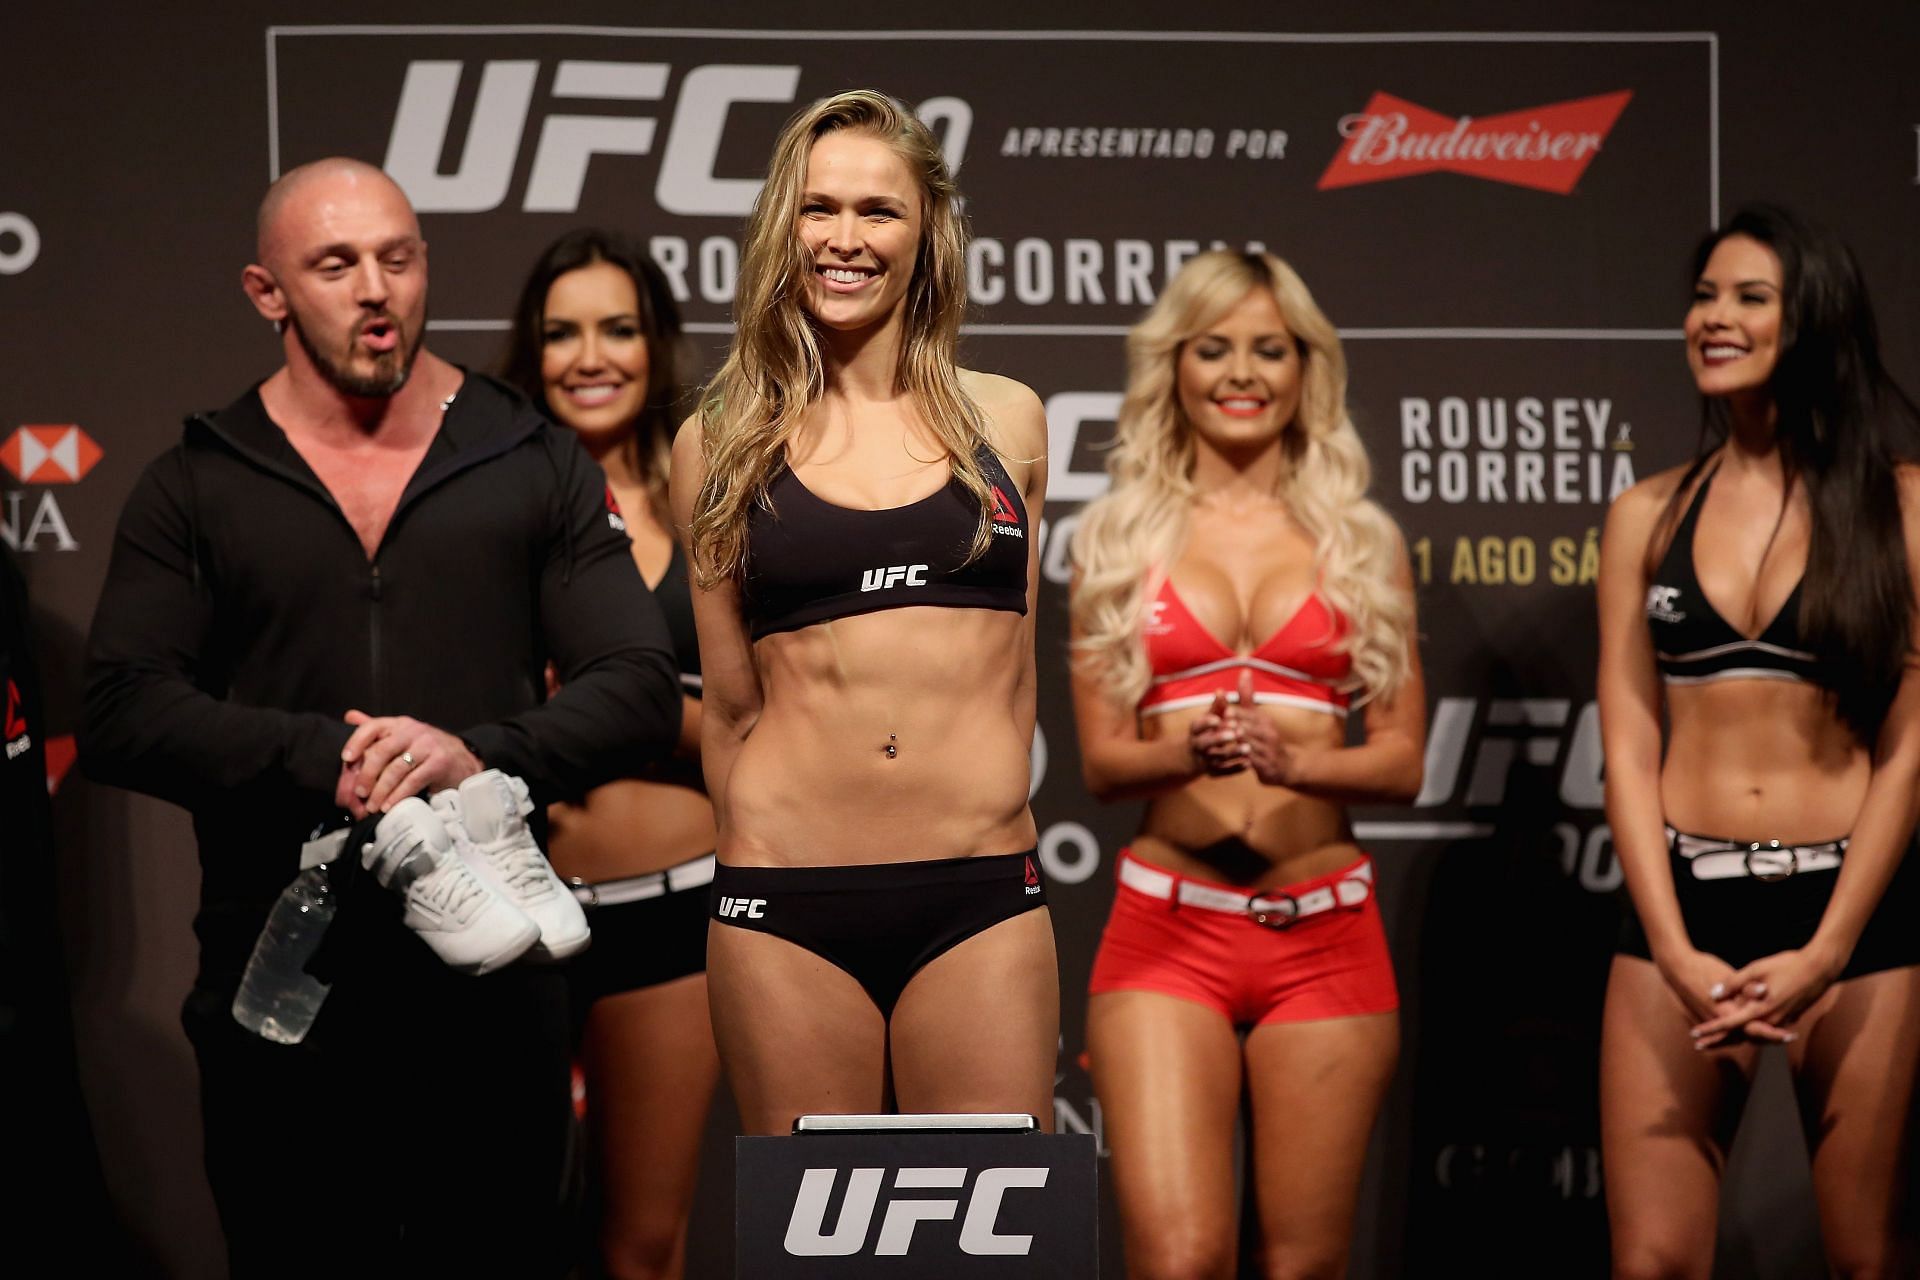 UFC 190 Weigh-in -- Ronda Rousey on the scale